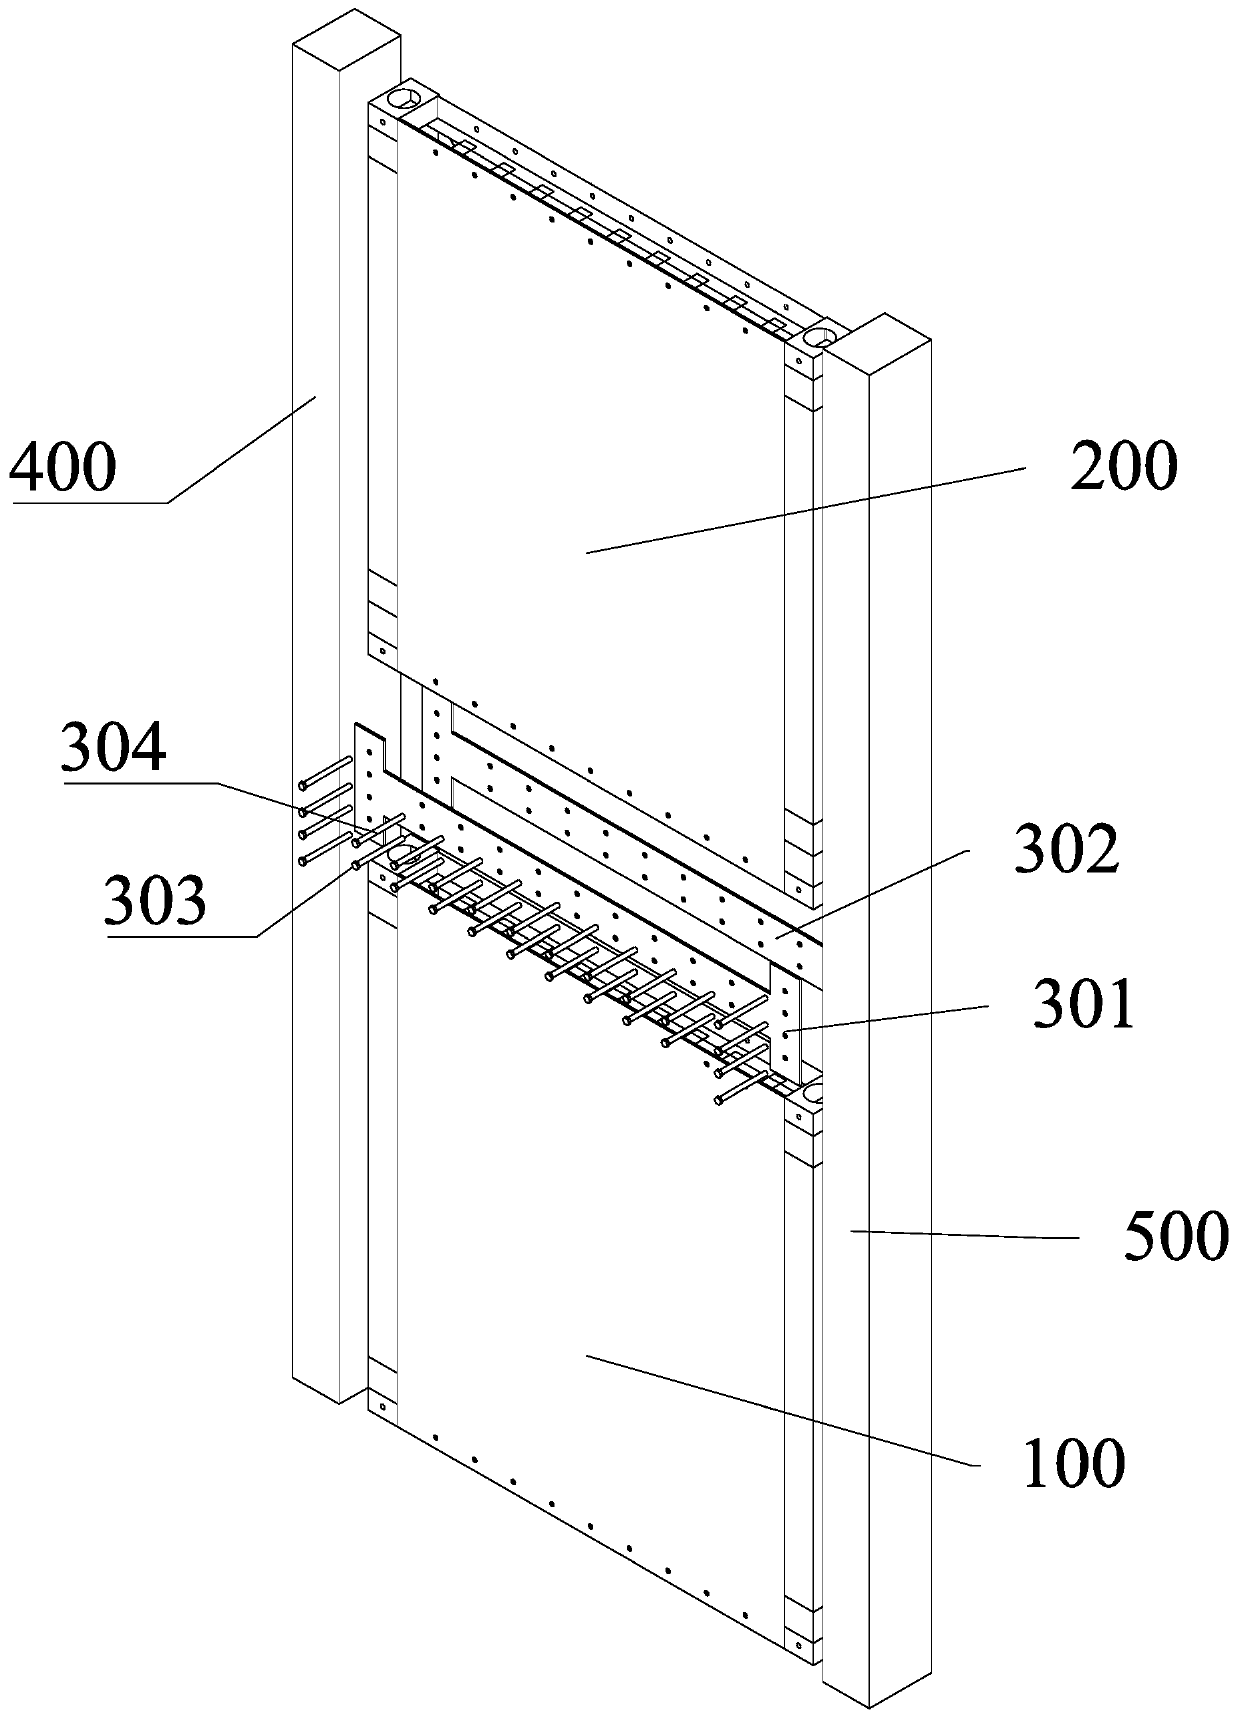 Fabricated shear wall with steel plate stud combined type diagonal bracing and construction method